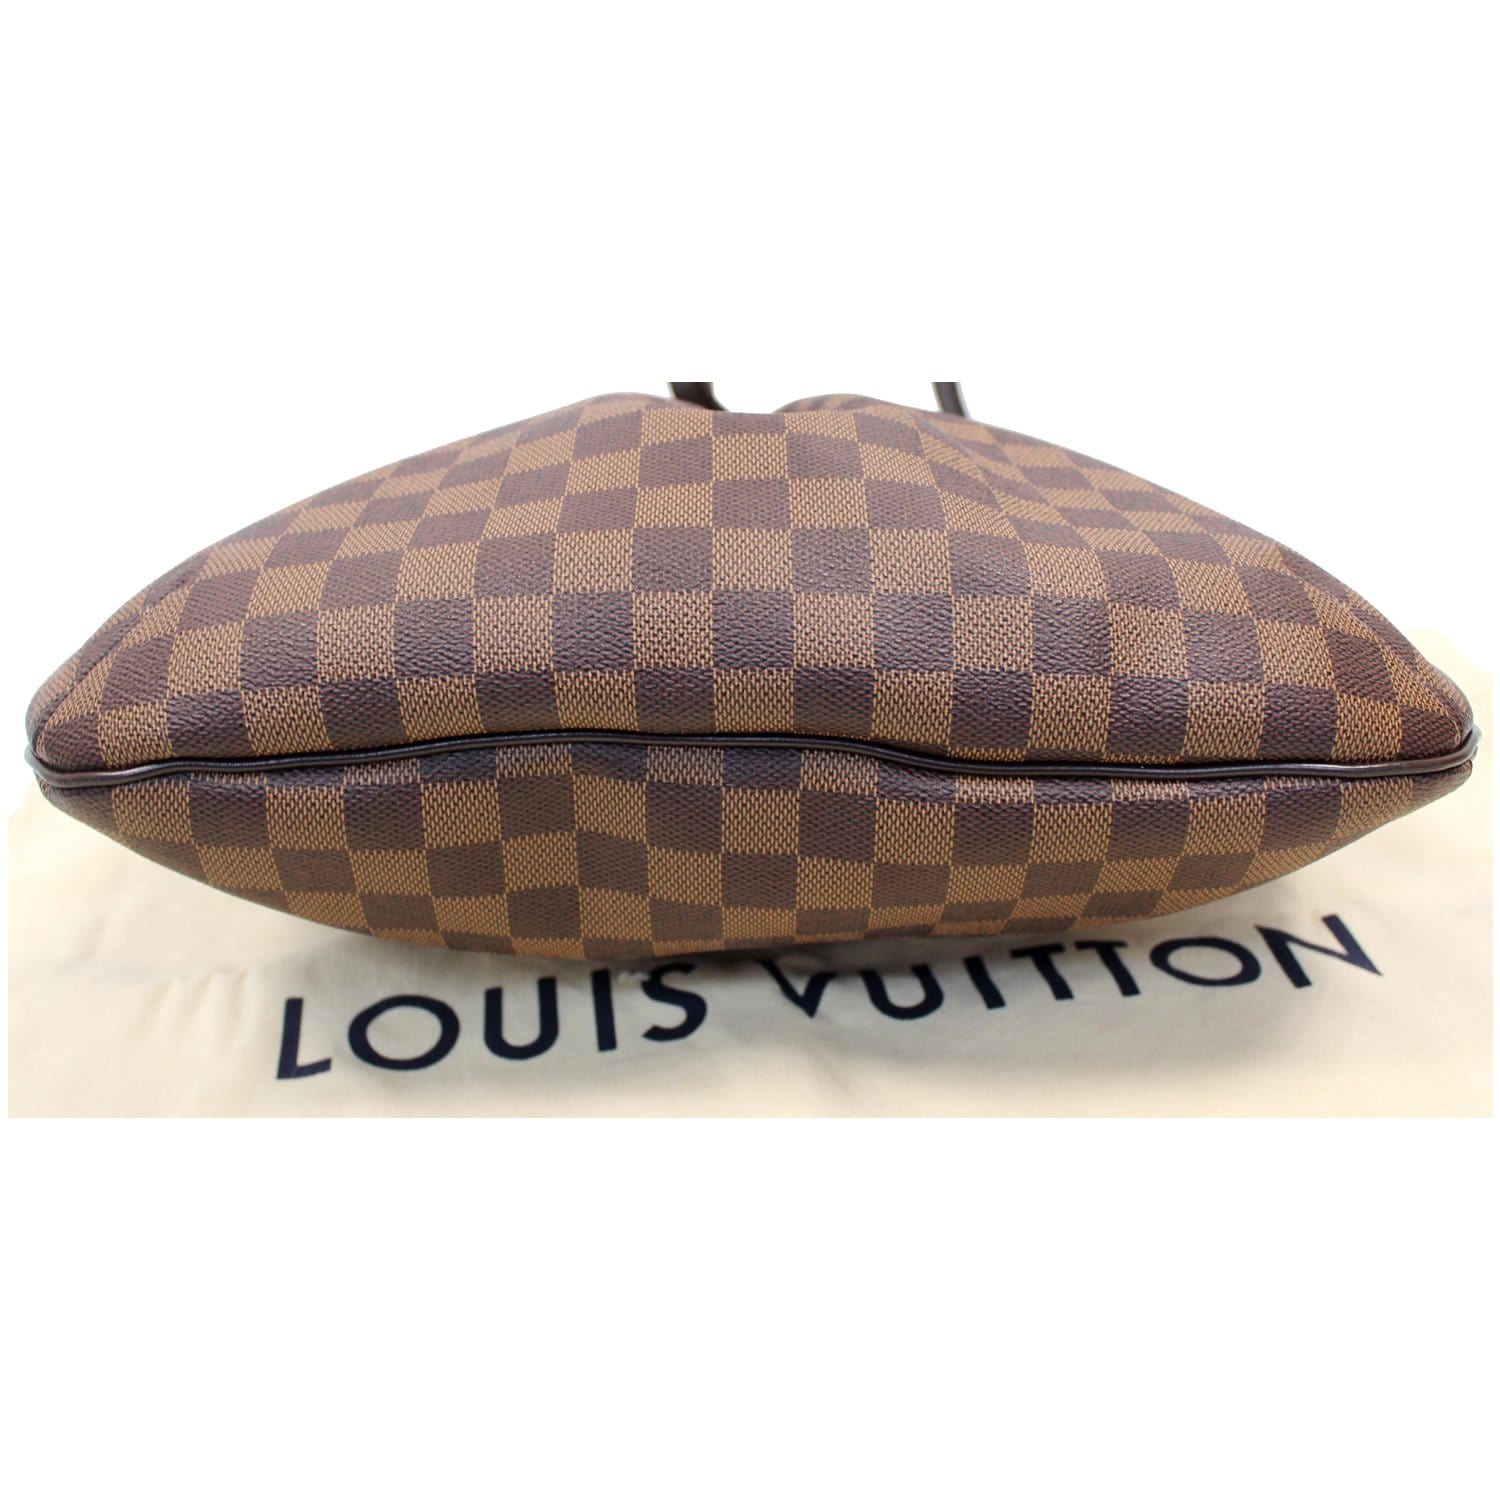 Louis Vuitton Designs Graphic by AMMELUK-DIGITAL PRODUCT · Creative Fabrica